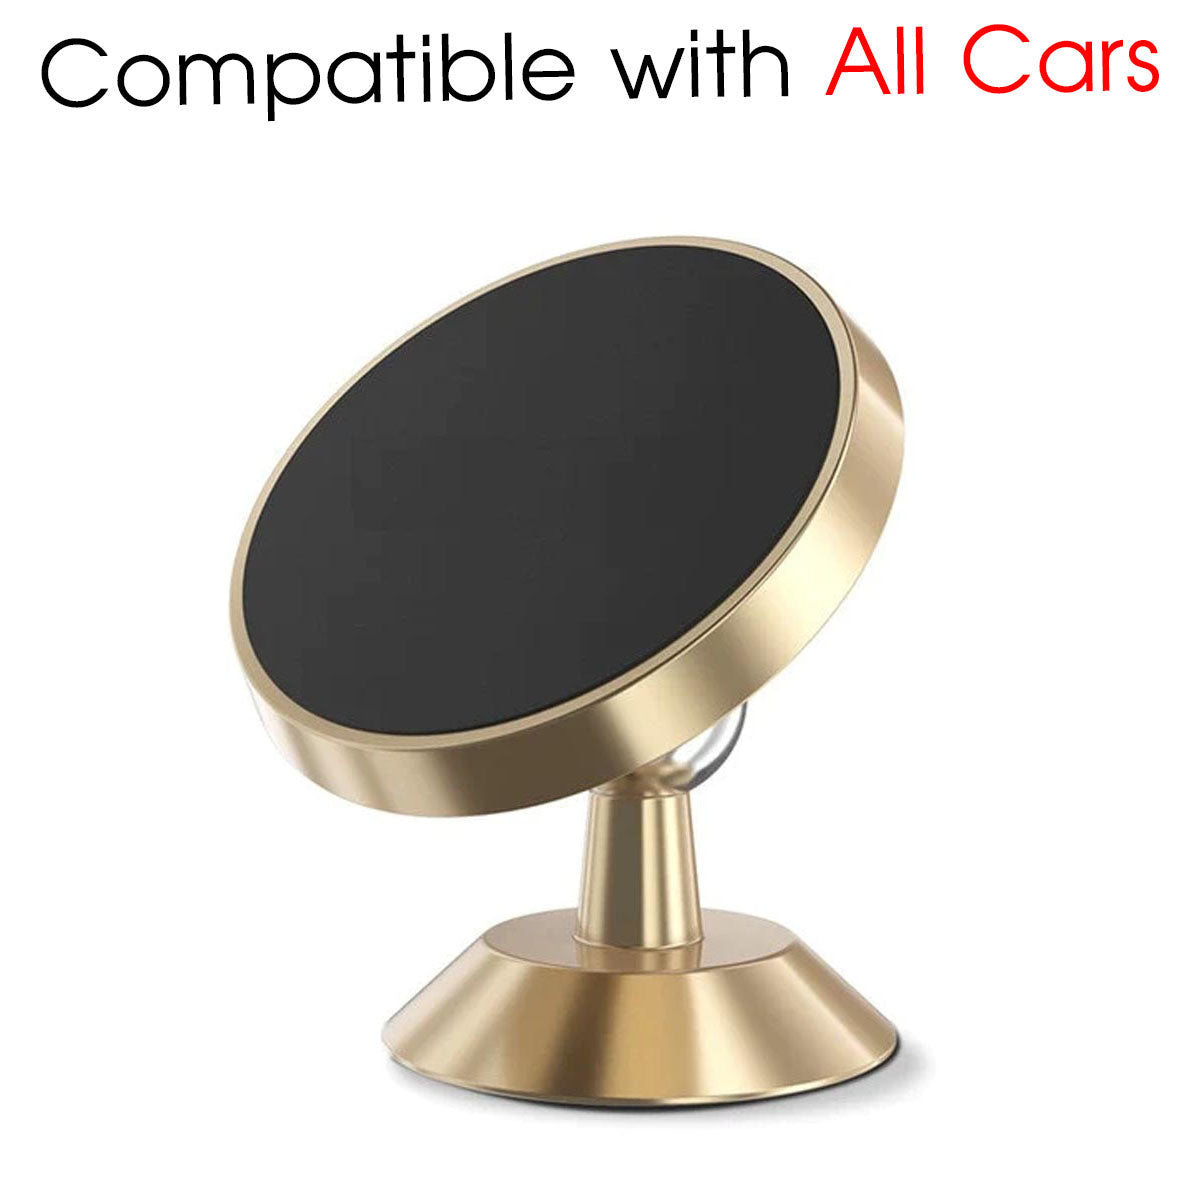 [2 Pack ] Magnetic Phone Mount, Custom For Your Cars, [ Super Strong Magnet ] [ with 4 Metal Plate ] car Magnetic Phone Holder, [ 360° Rotation ] Universal Dashboard car Mount Fits All Cell Phones, Car Accessories LI13982